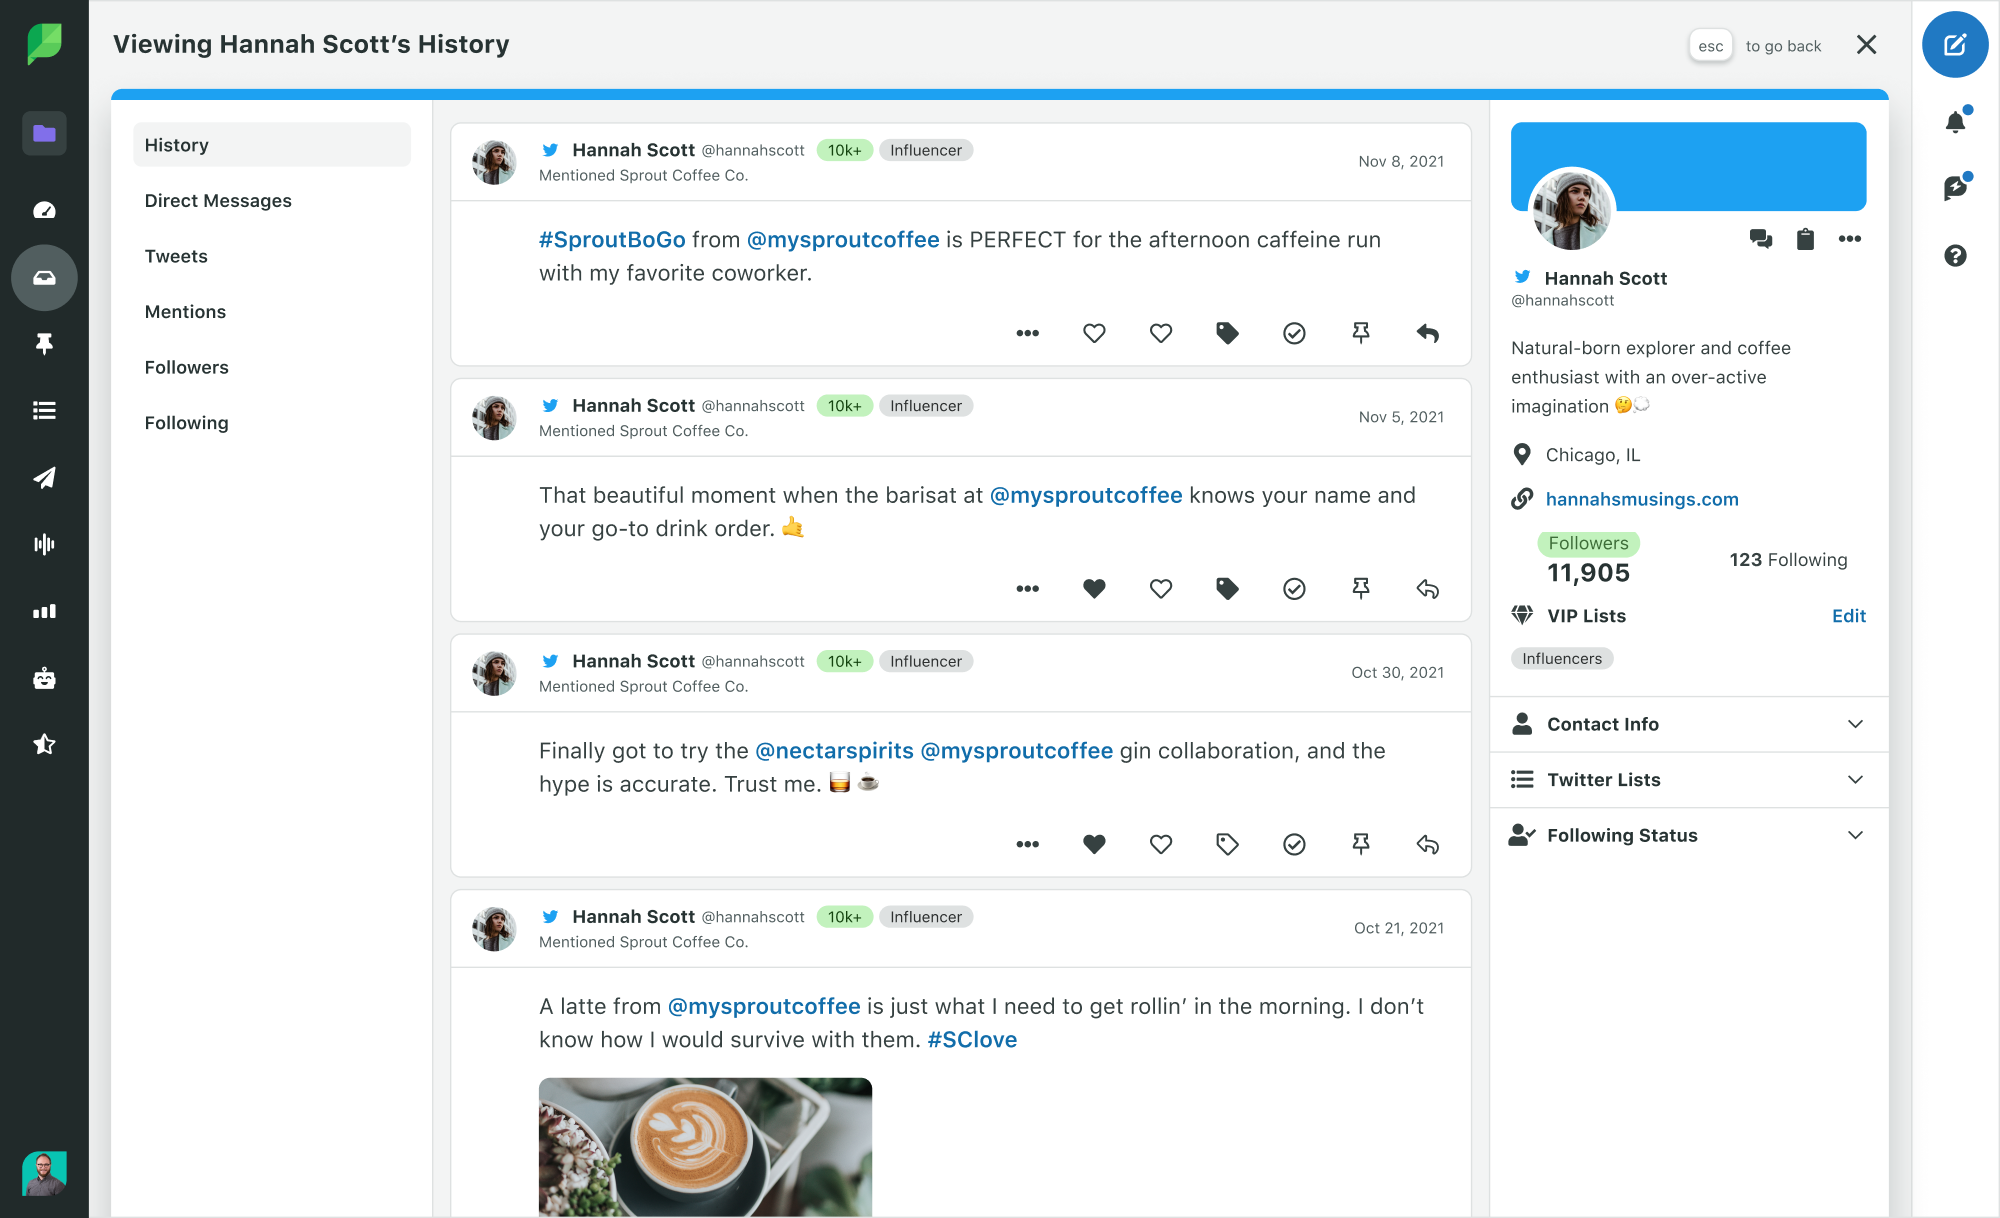 Sprout Social Product Image of Engagement Contact View with Twitter Conversation History